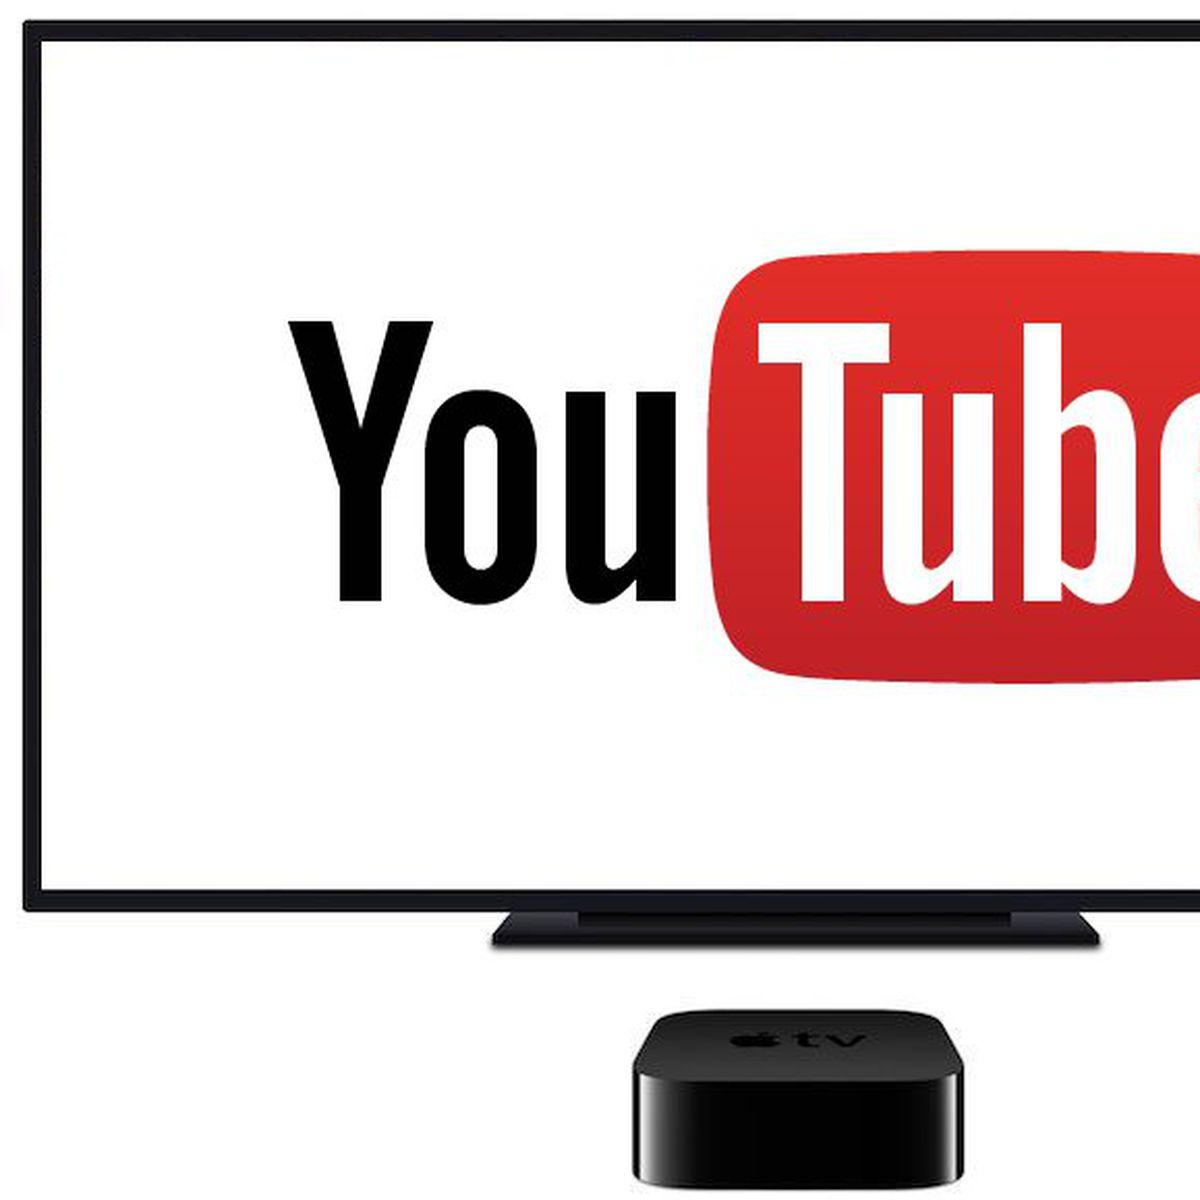 Youtube Tv Hikes Price To 64 99 Per Month Following New Channel